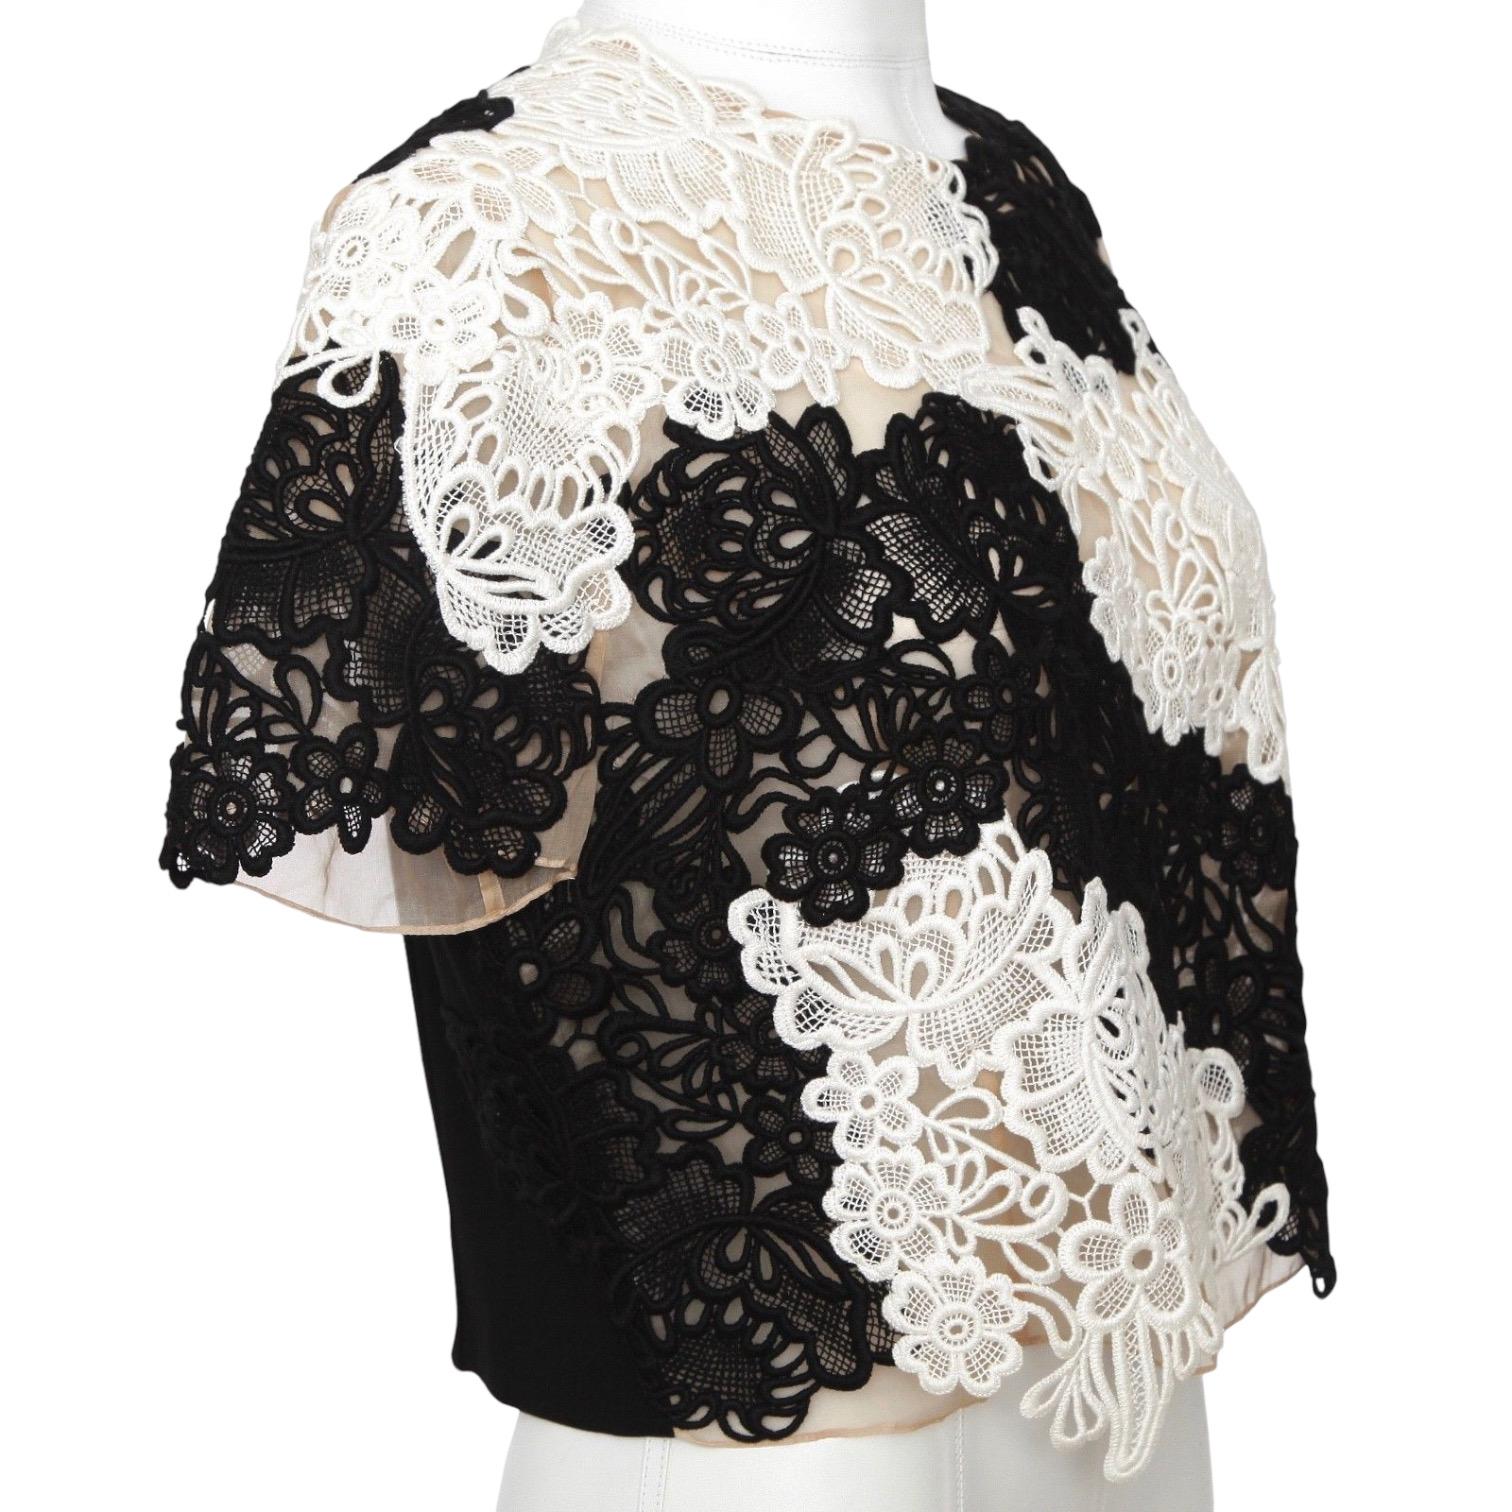 GUARANTEED AUTHENTIC TIMELESS ERDEM EMIKO LACE APPLIQUE TOP

 

Design:
- Classic cropped top with black and white lace appliqué.
- Nude silk backing.
- Crew neckline.
- Rounded shoulder, short sleeve.
- Rear full zipper closure.

Size: US